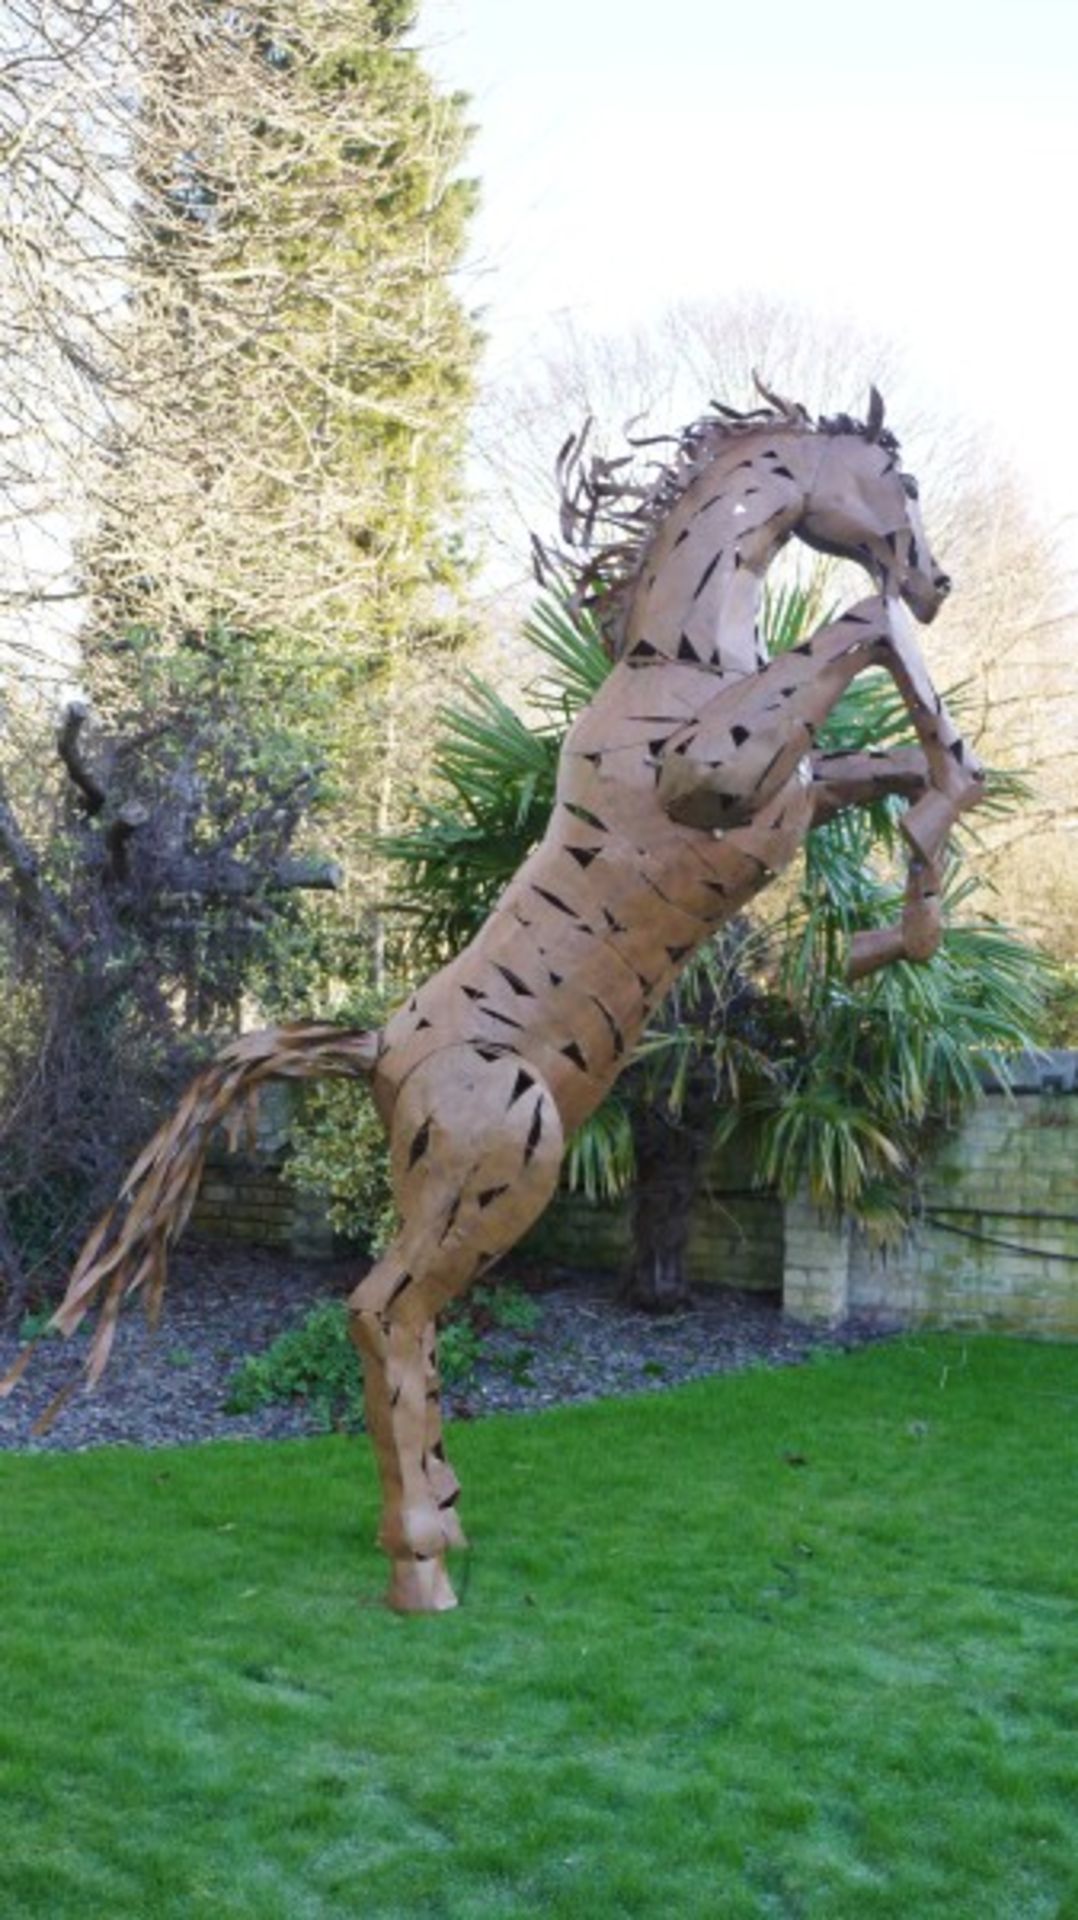 VERY RARE METAL REARING HORSE STATUE- LARGER THAN LIFE - 11 FEET HIGH ! - Image 5 of 6